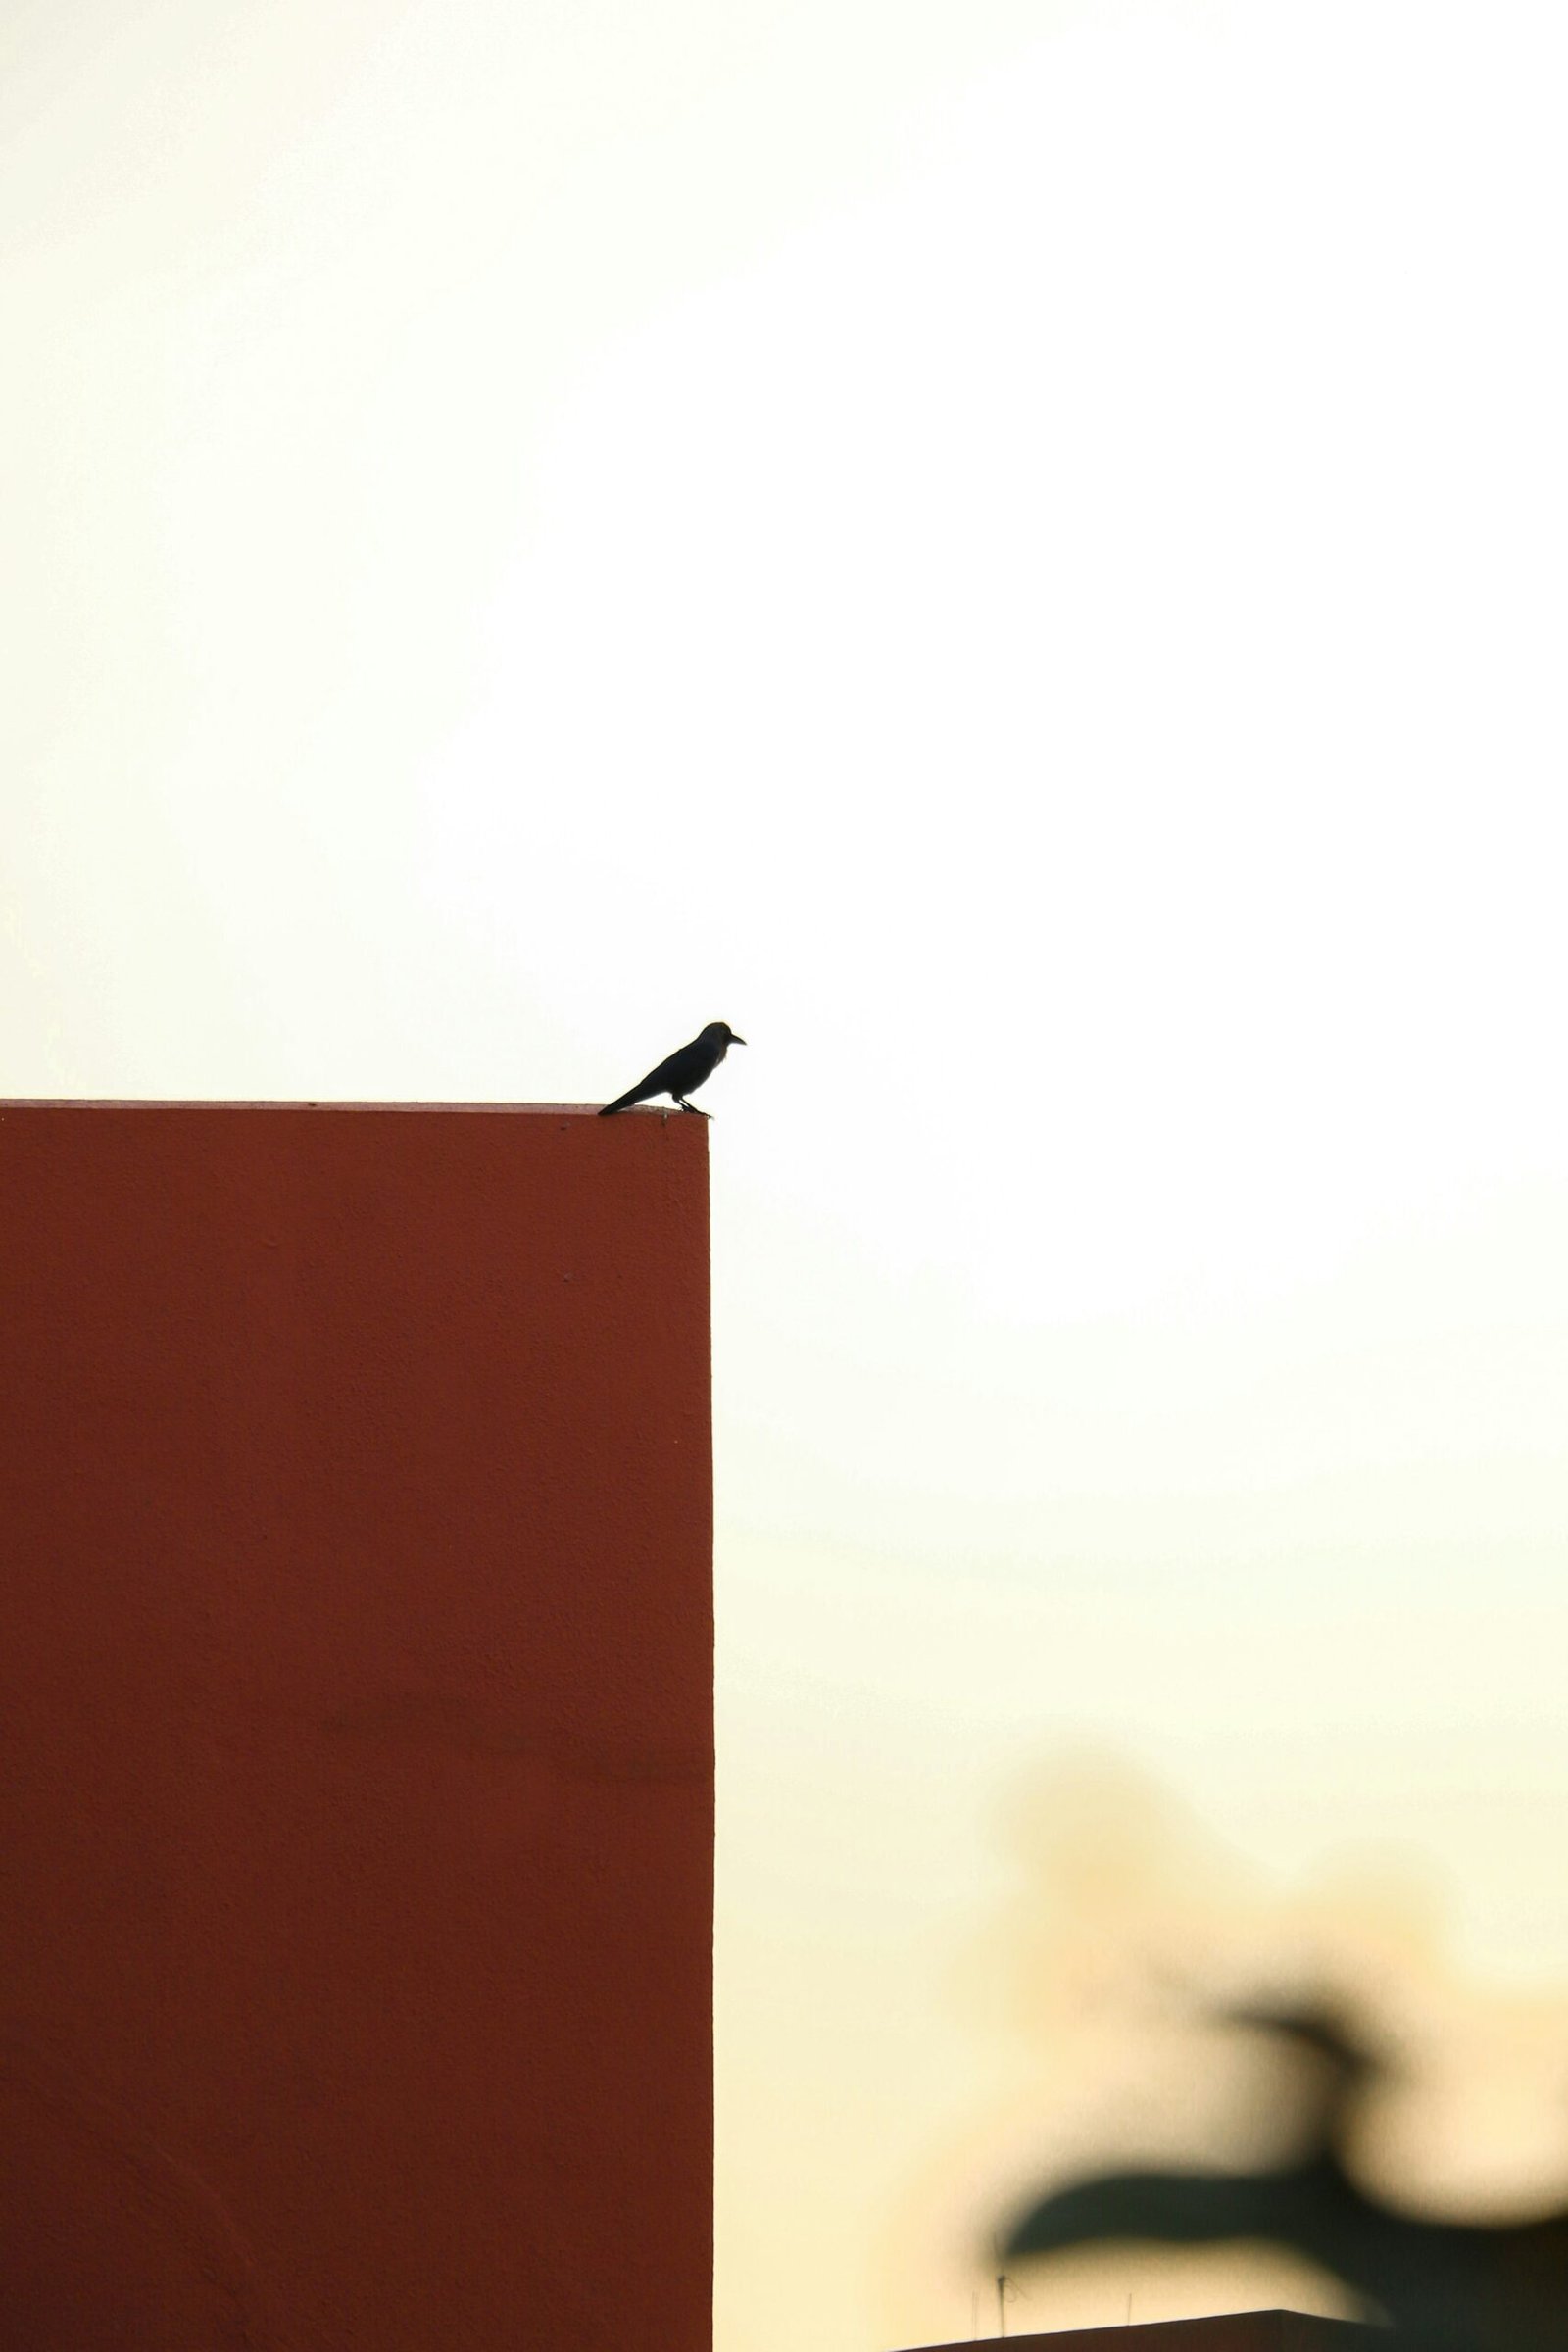 a small bird sitting on top of a red box